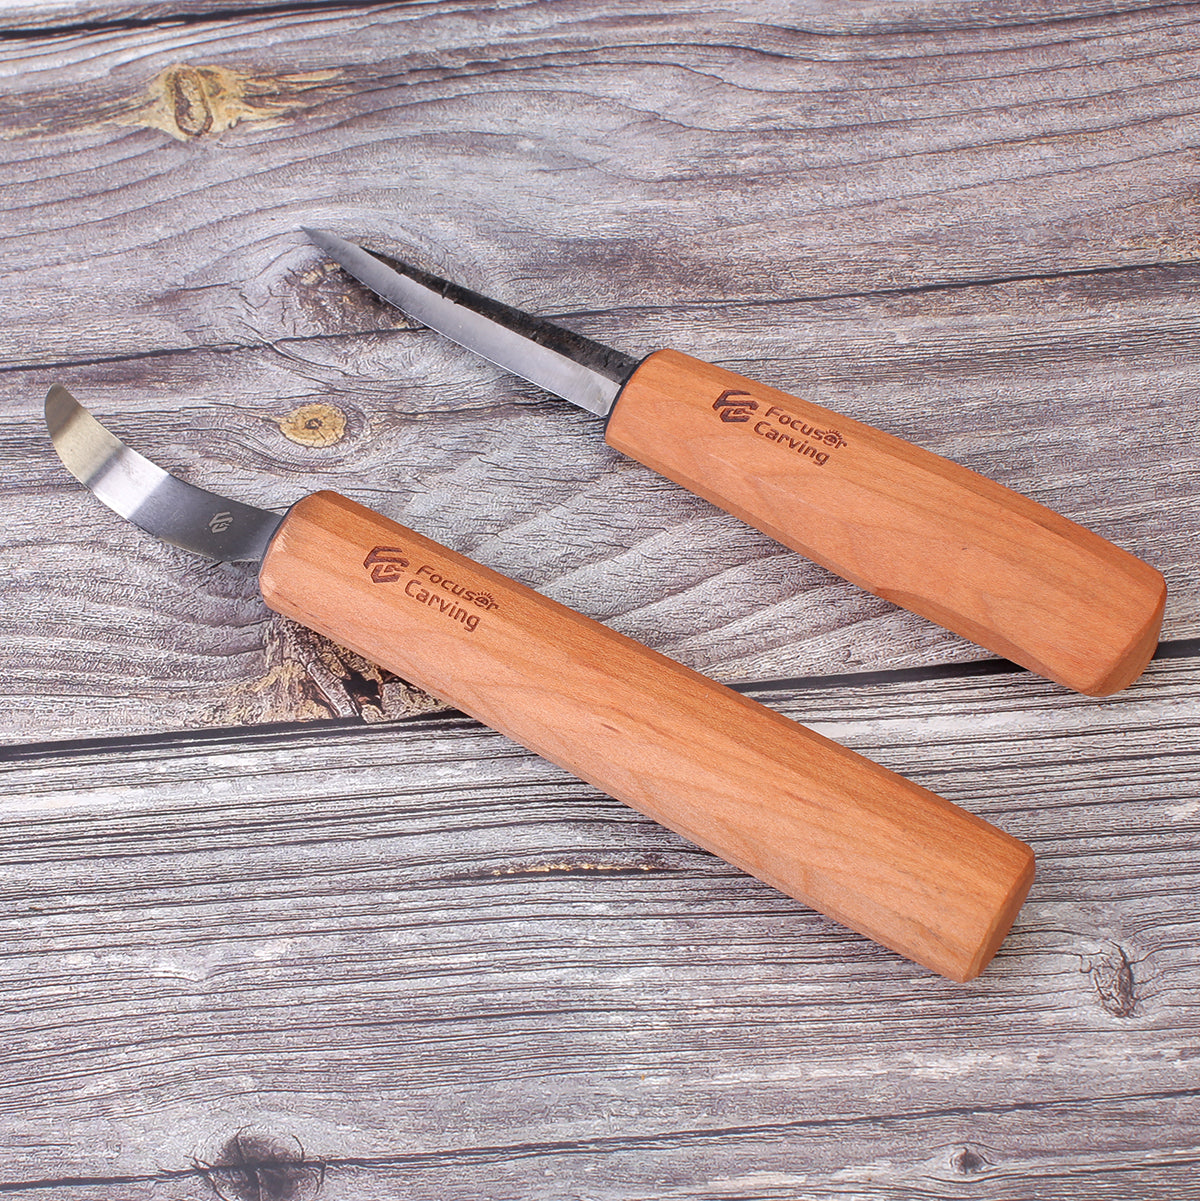 Chip Carving Knives, Wood Carving Set, Small chisel - The Spoon Crank